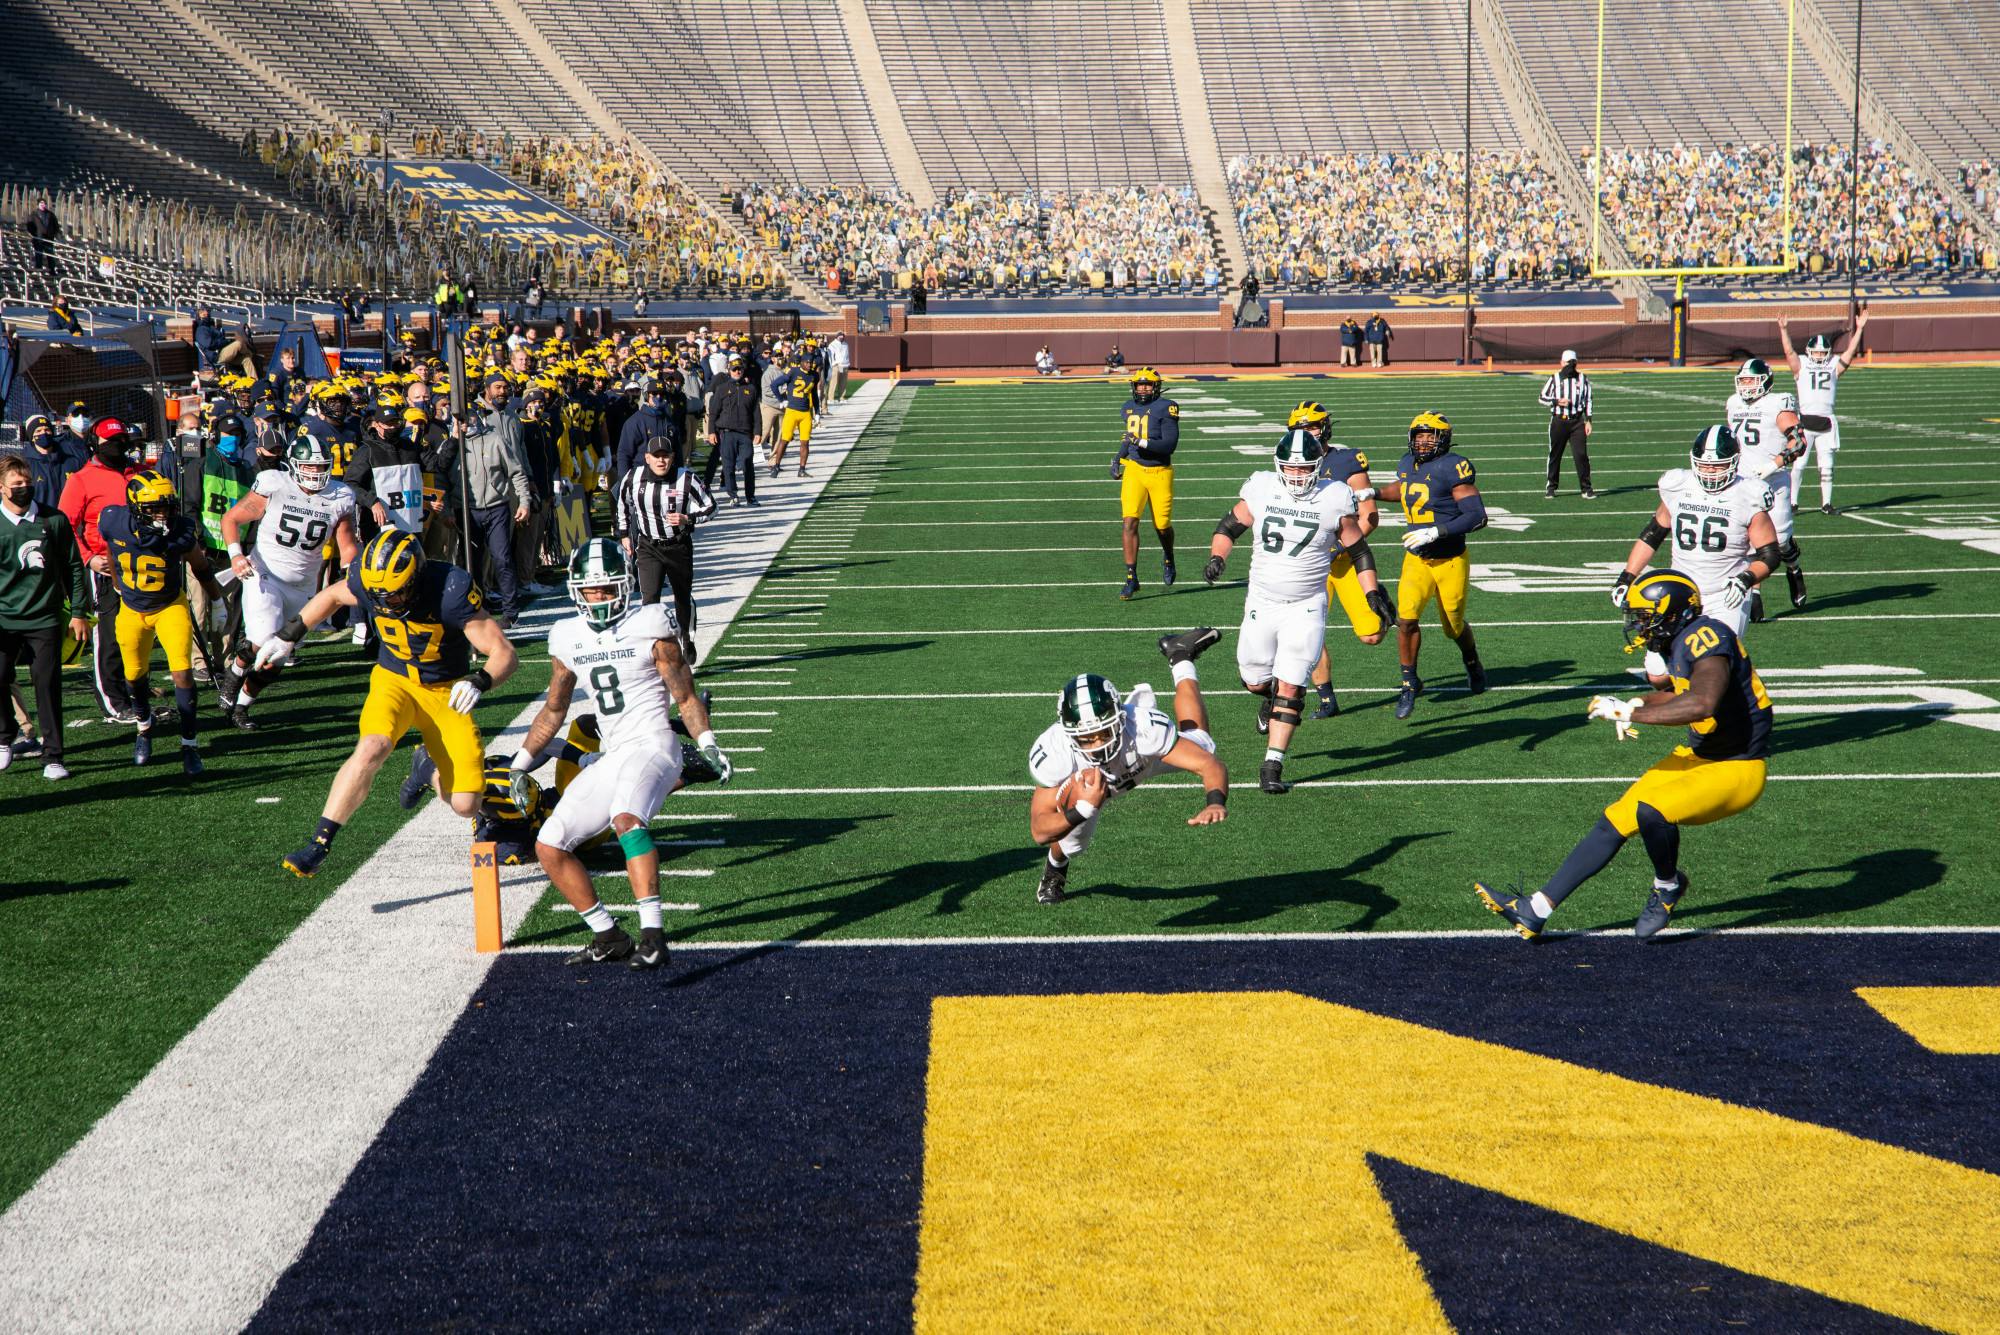 <p>Running back Connor Heyward (11) scores the game-winning touchdown for Michigan State in Ann Arbor, MI on Oct. 31, 2020.</p>